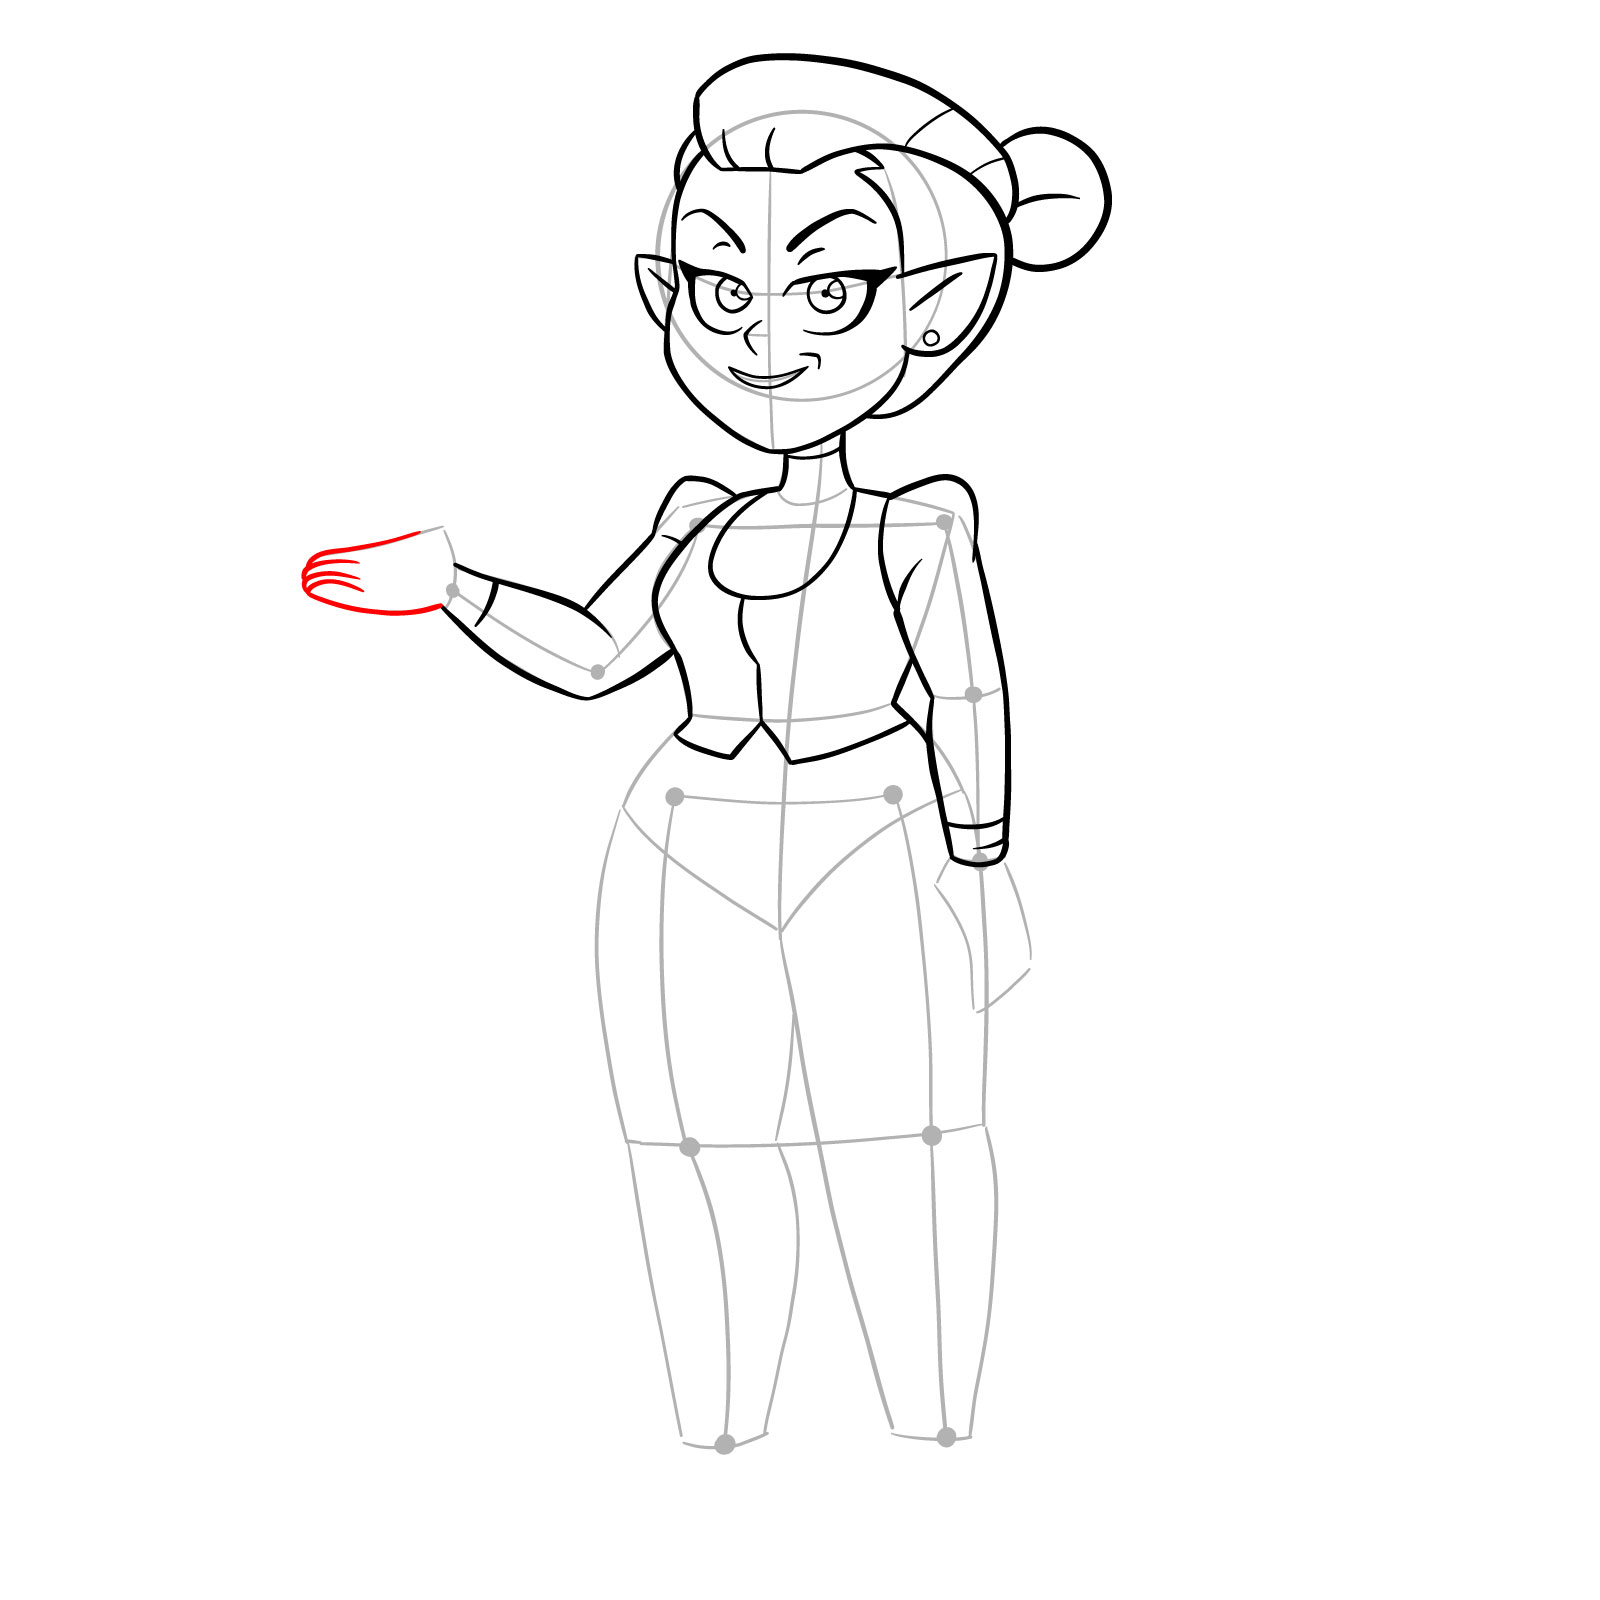 How to draw Odalia Blight from The Owl House - step 19